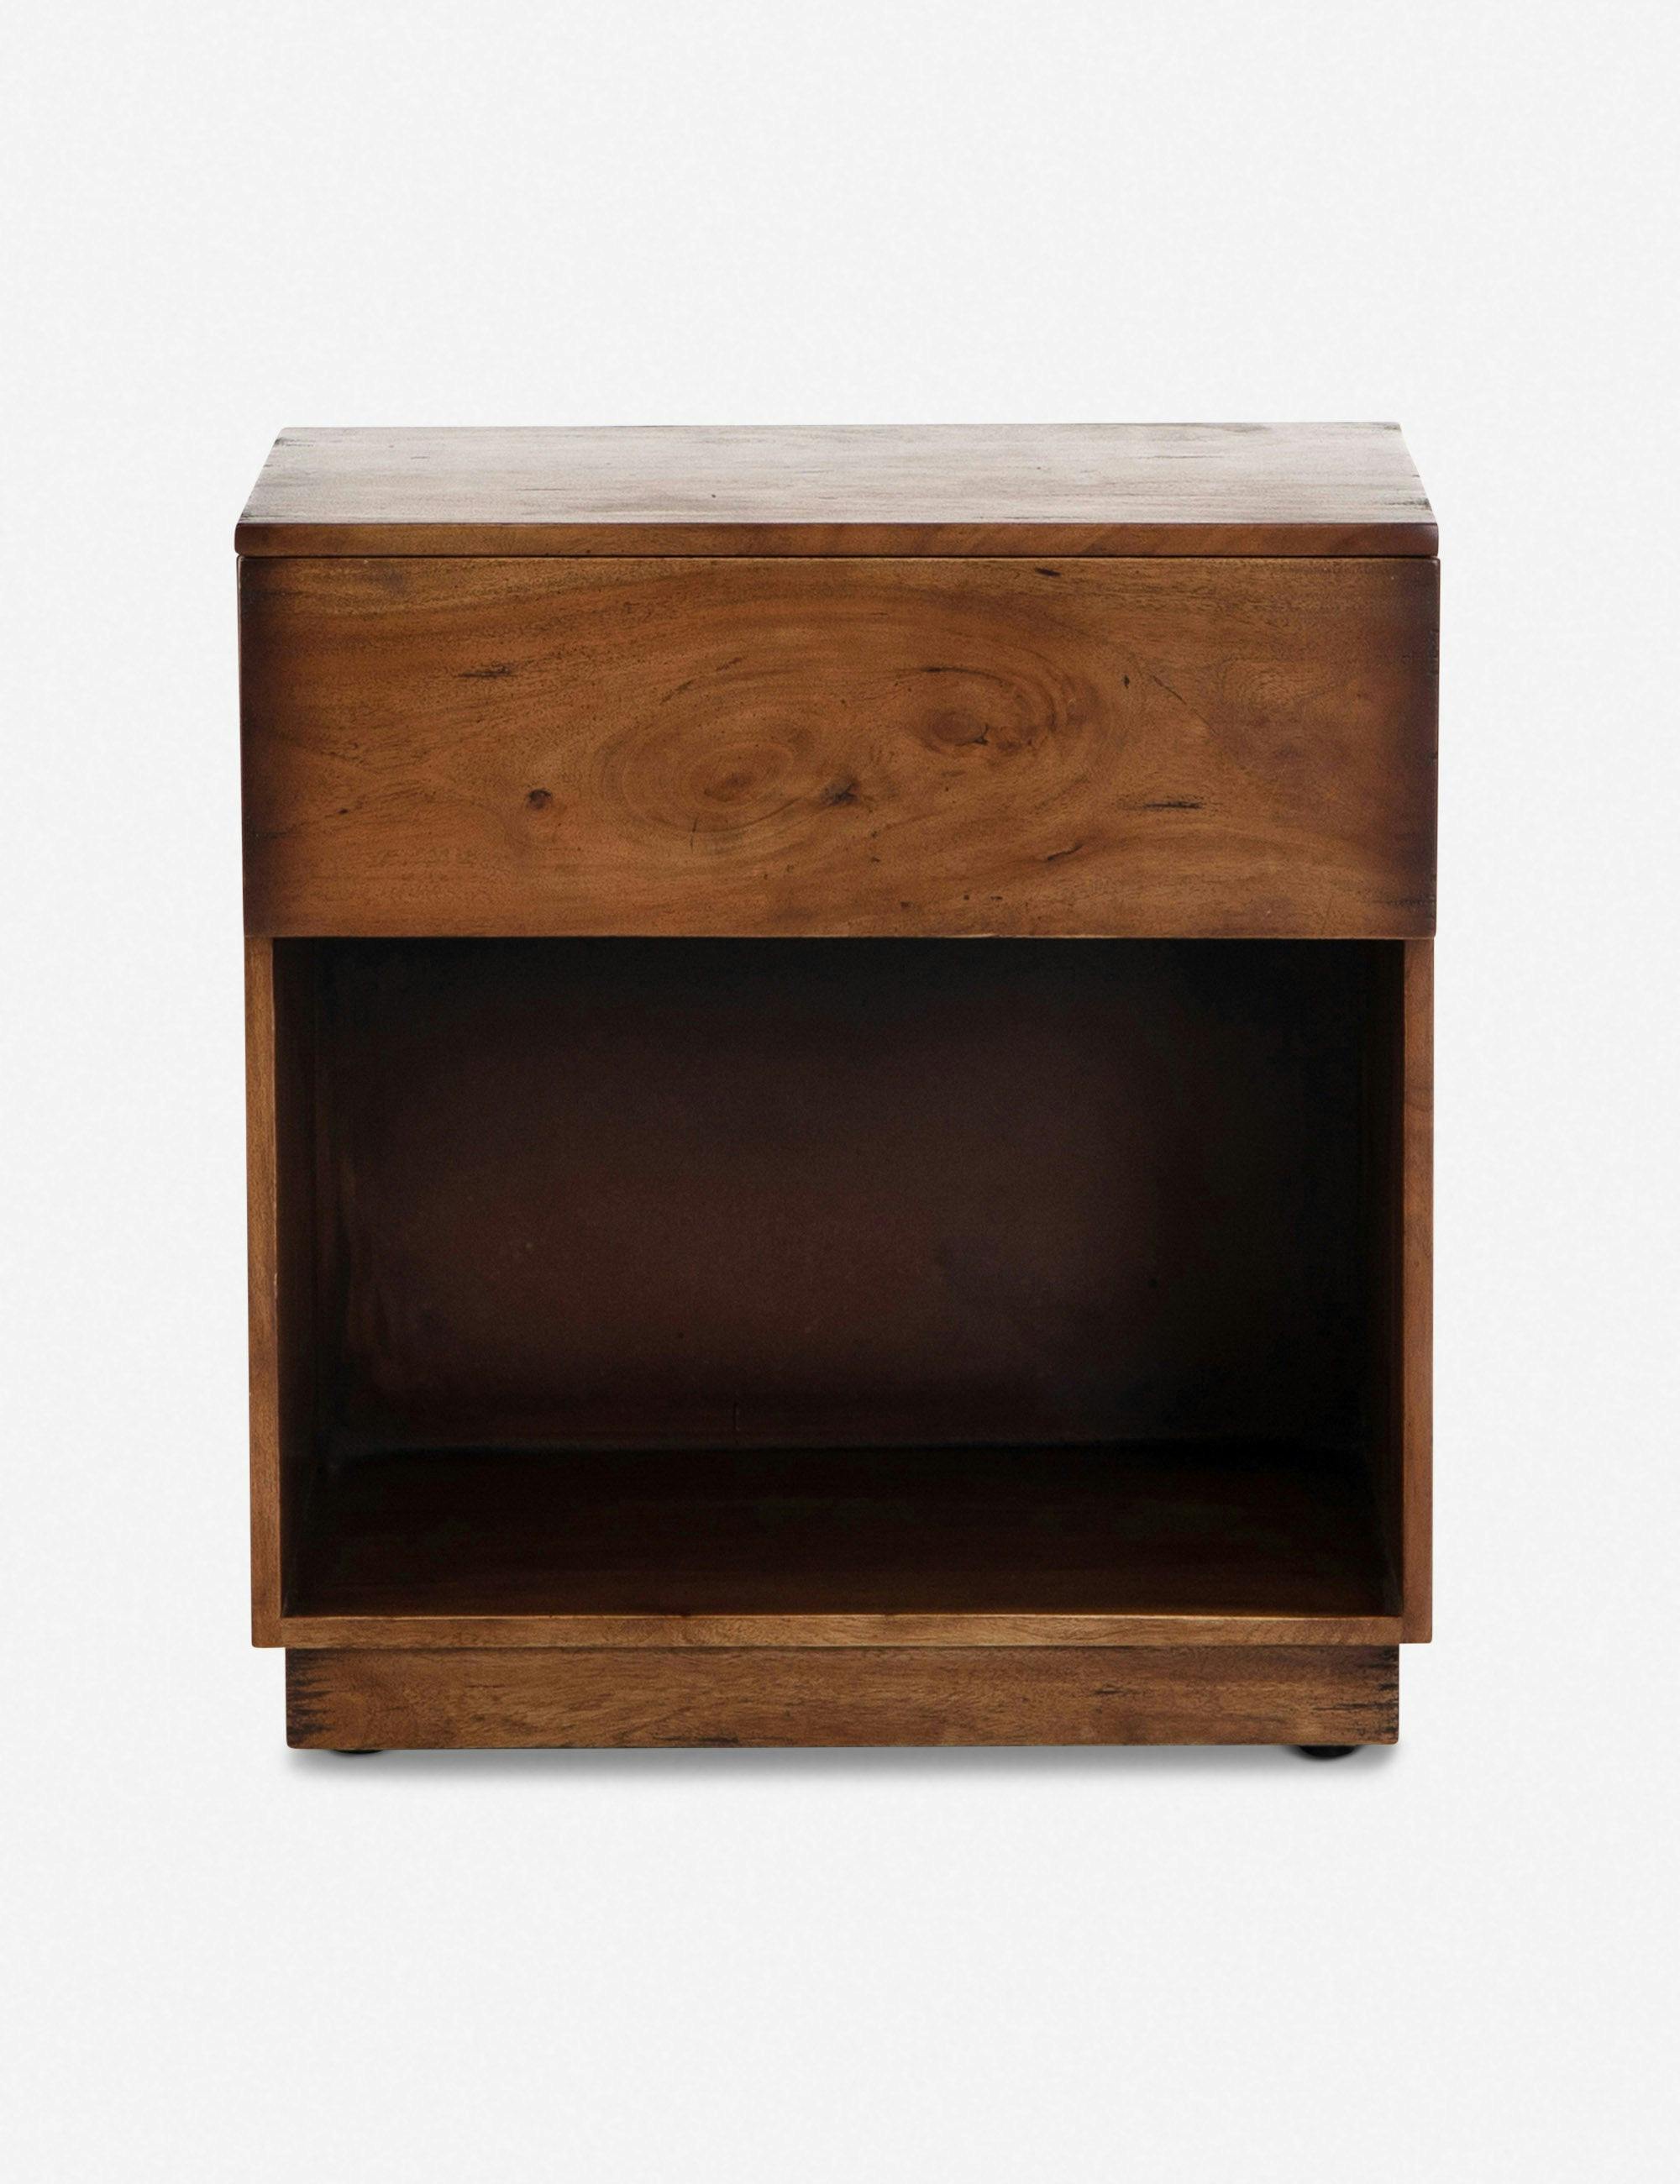 Parkview Arturo Acacia and Reclaimed Wood Nightstand